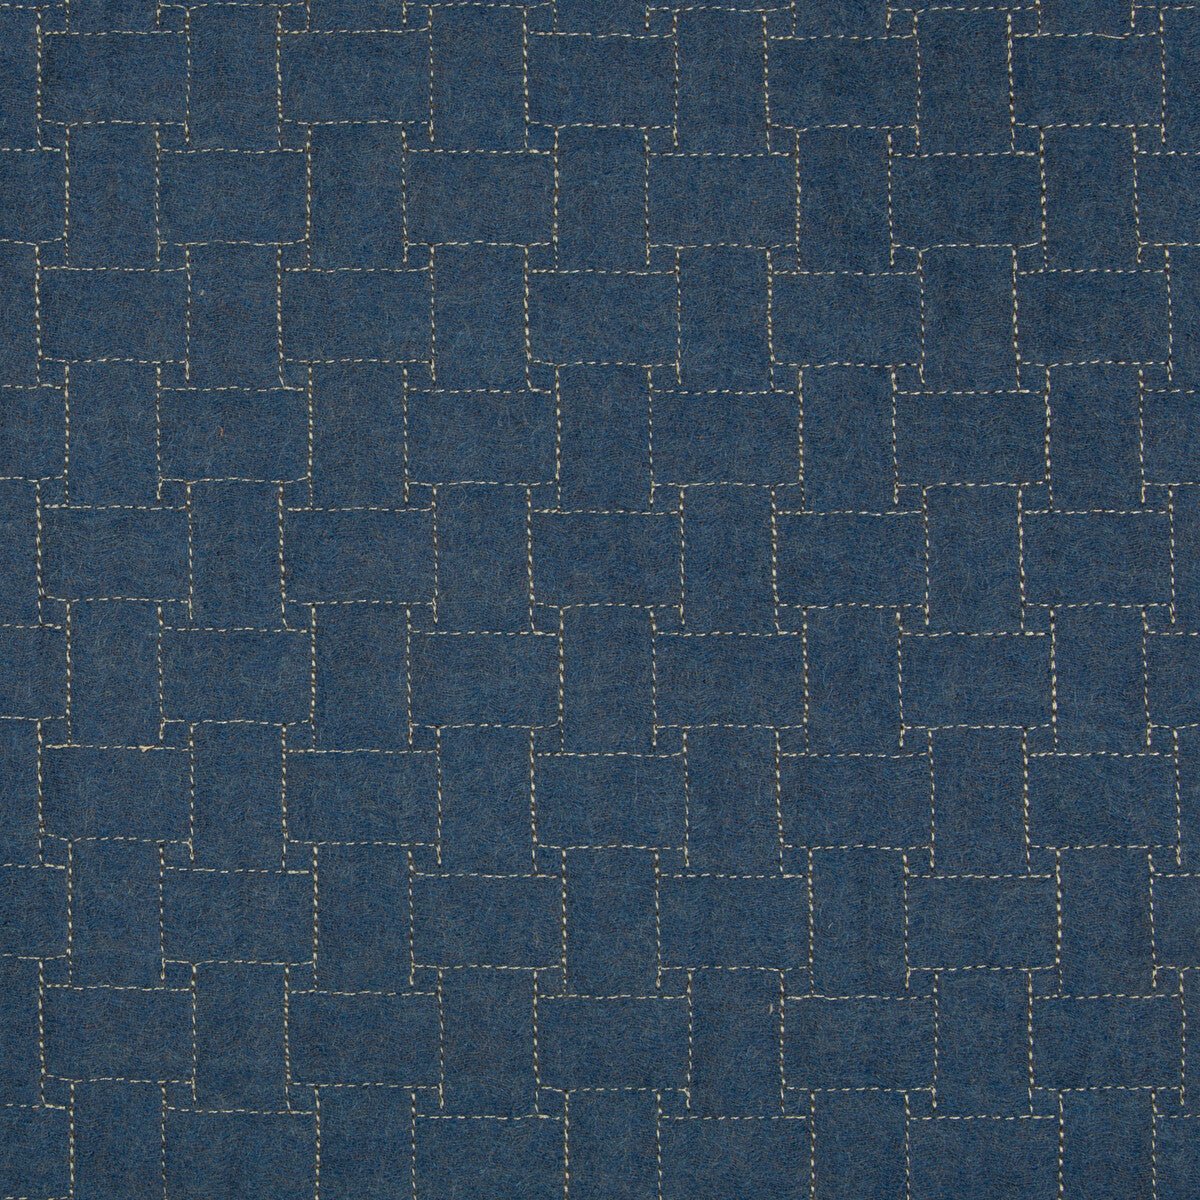 Epping Quilt fabric in blue color - pattern 2017140.5.0 - by Lee Jofa in the Lodge II Weaves And Embroideries collection